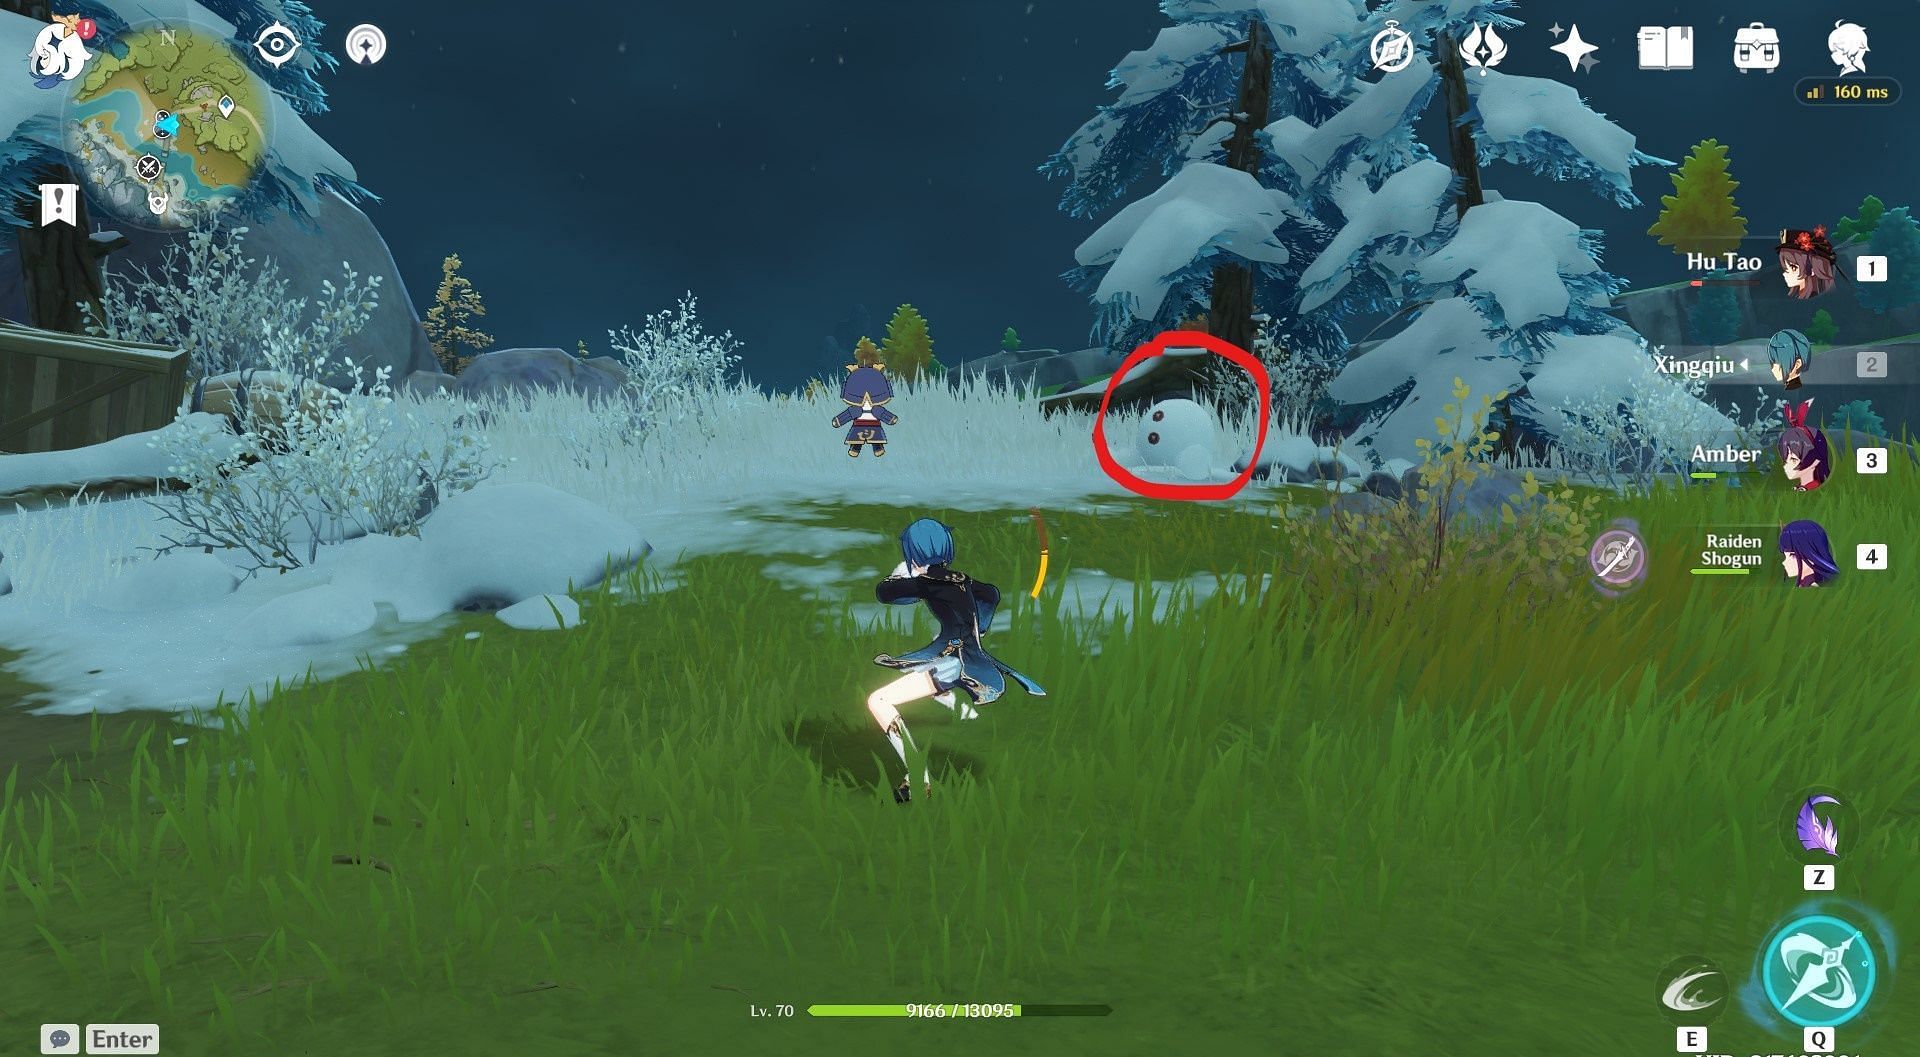 Location of Puffy Snowman in new Dragonspine event (Image via Genshin Impact)